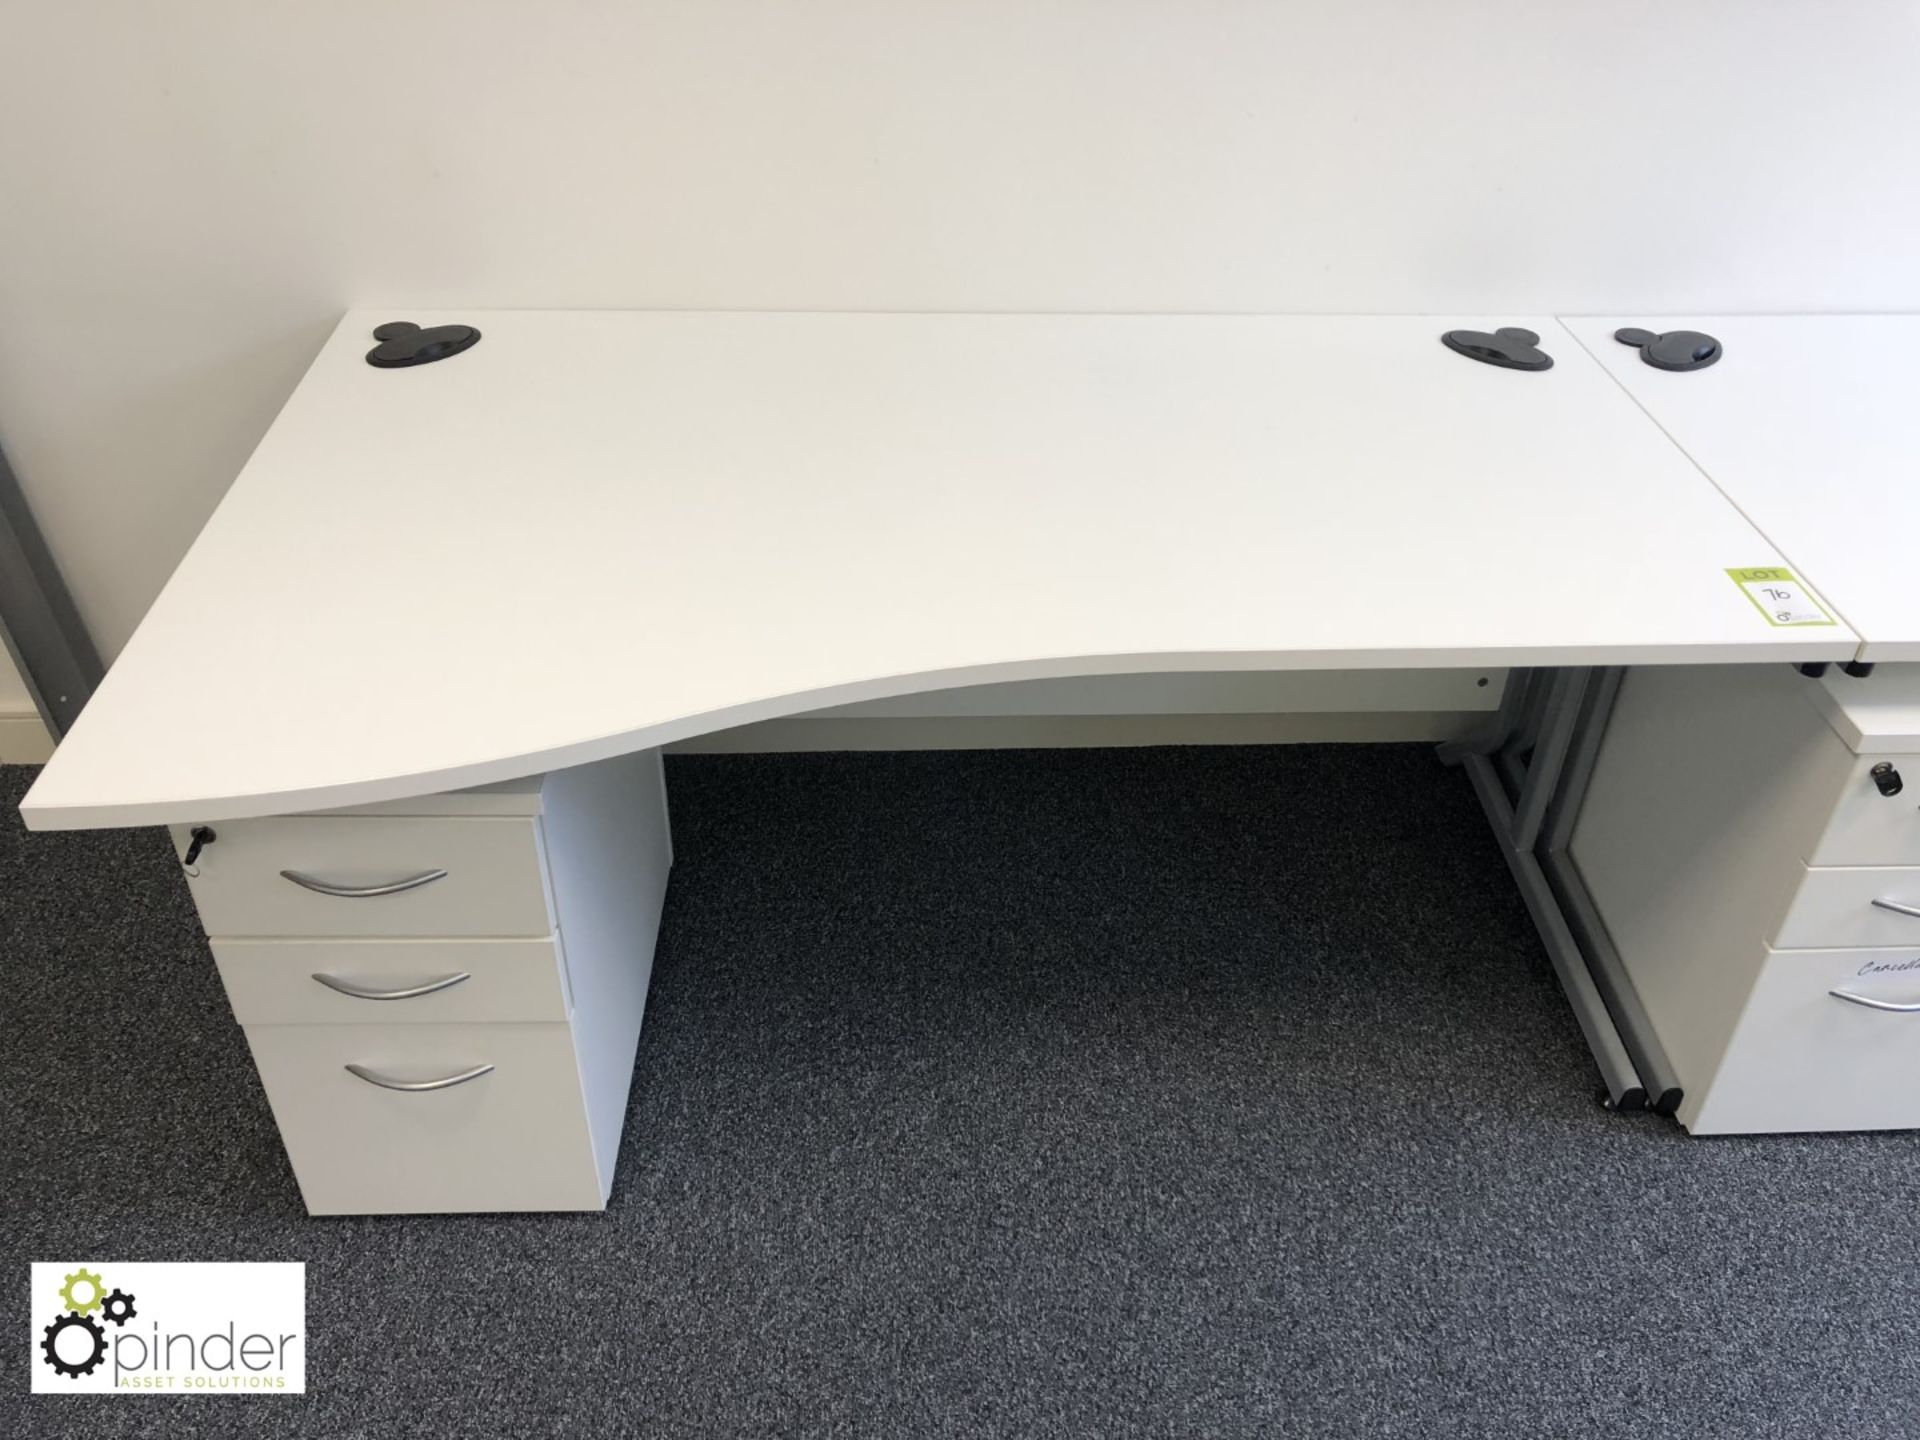 2-person Desk Cluster, comprising 2 shaped desks, 1600mm x 1000mm, white, with 2 3-drawer - Image 2 of 2